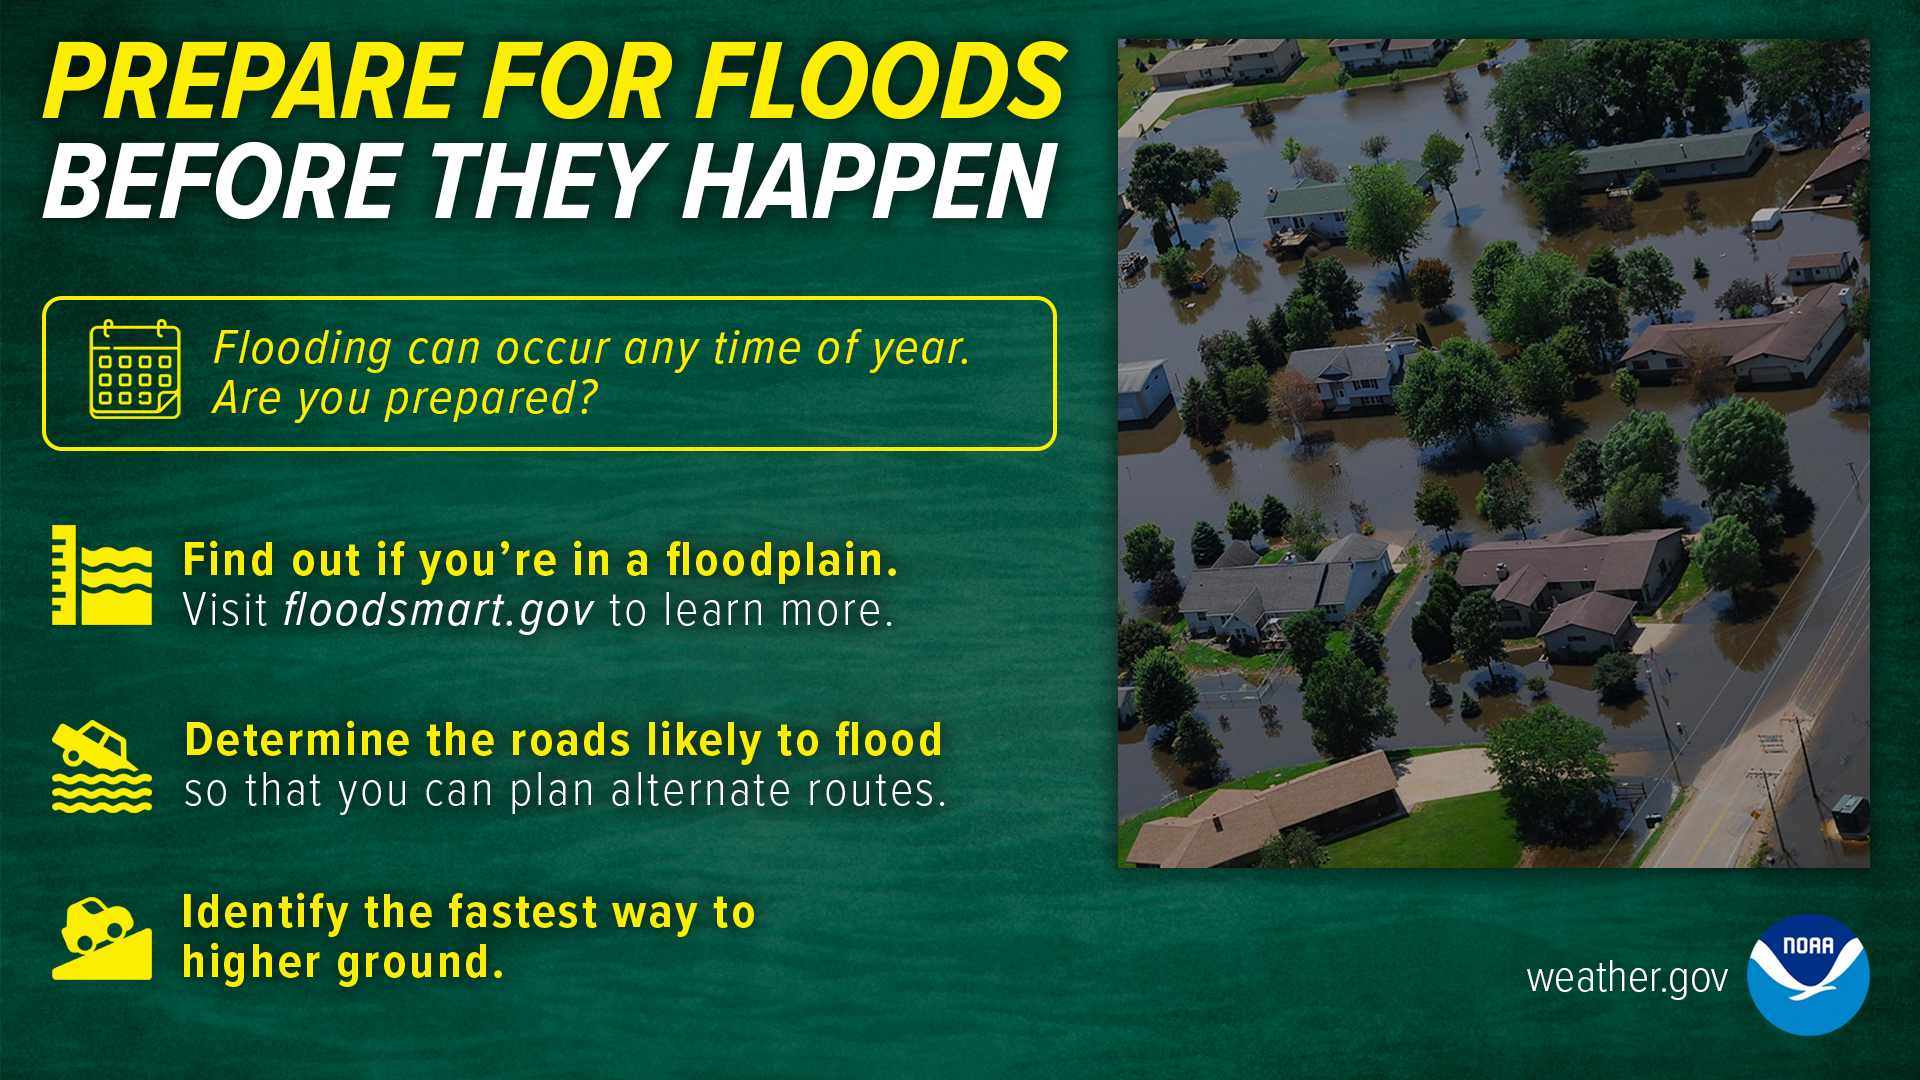 Prepare for floods before they happen. Flooding can occur any time of year. Are you prepared? Find out if you're in a floodplain. Visit floodsmart.gov to learn more. Determine the roads likely to flood so that you can plan alternate routes. Identify the fastest way to higher ground.